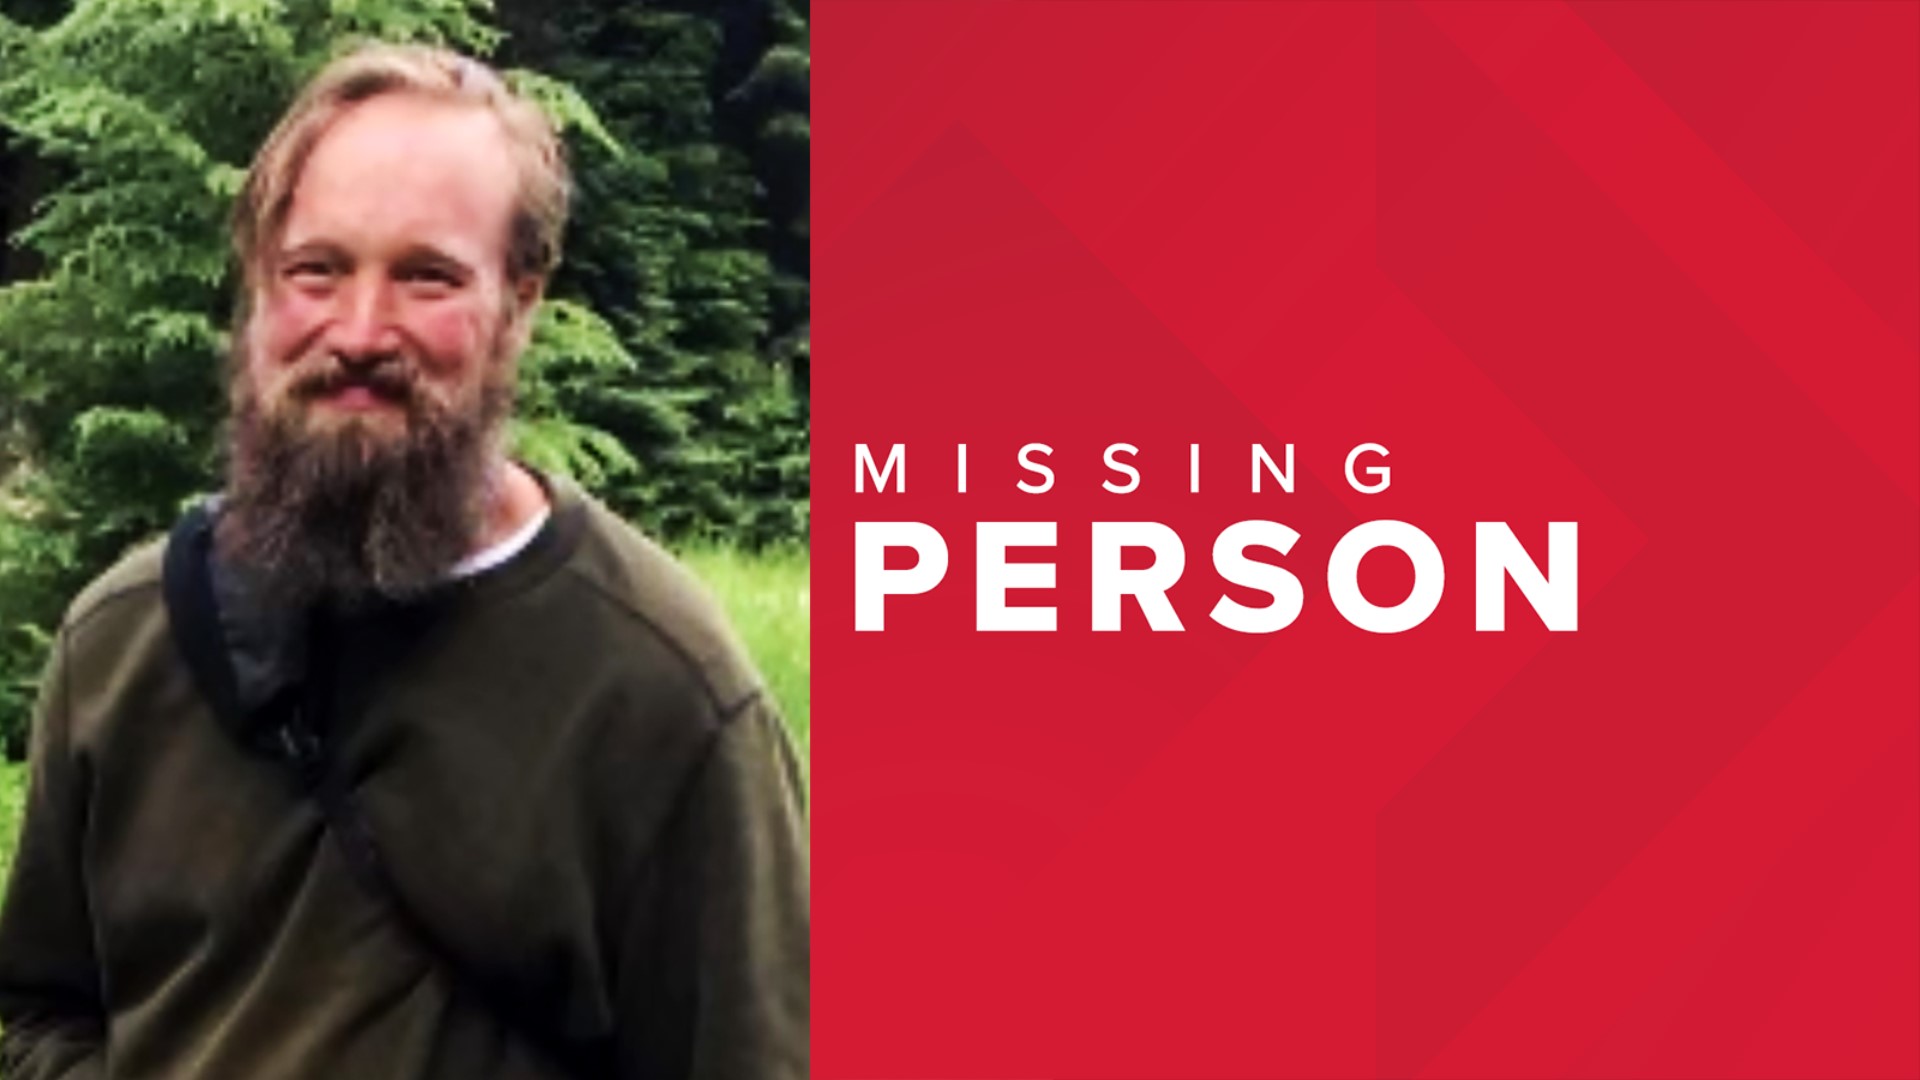 44-year-old Ryan S. McCollum is described as a white man. He is approximately 6’ feet tall and weighs 175 pounds. He has brown hair, blue eyes, and a full beard.